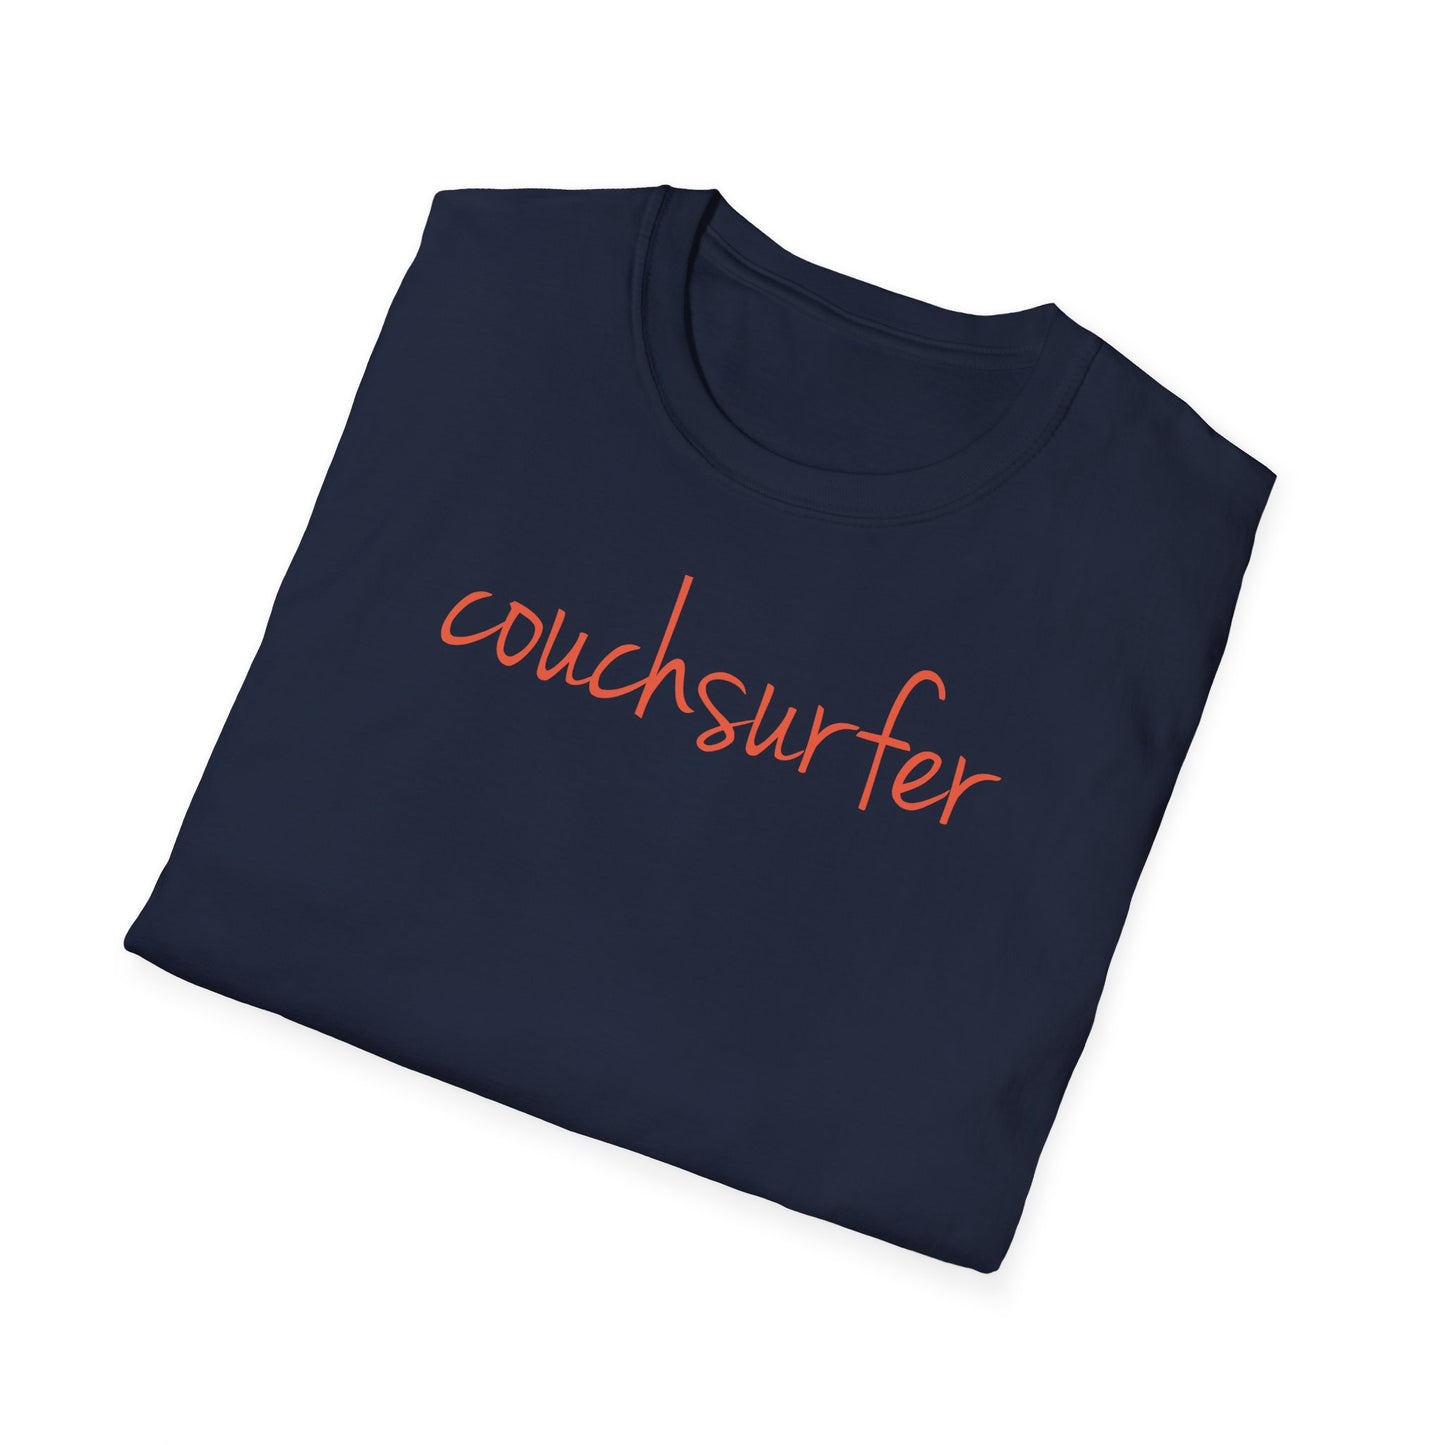 The Couchsurfer Tee